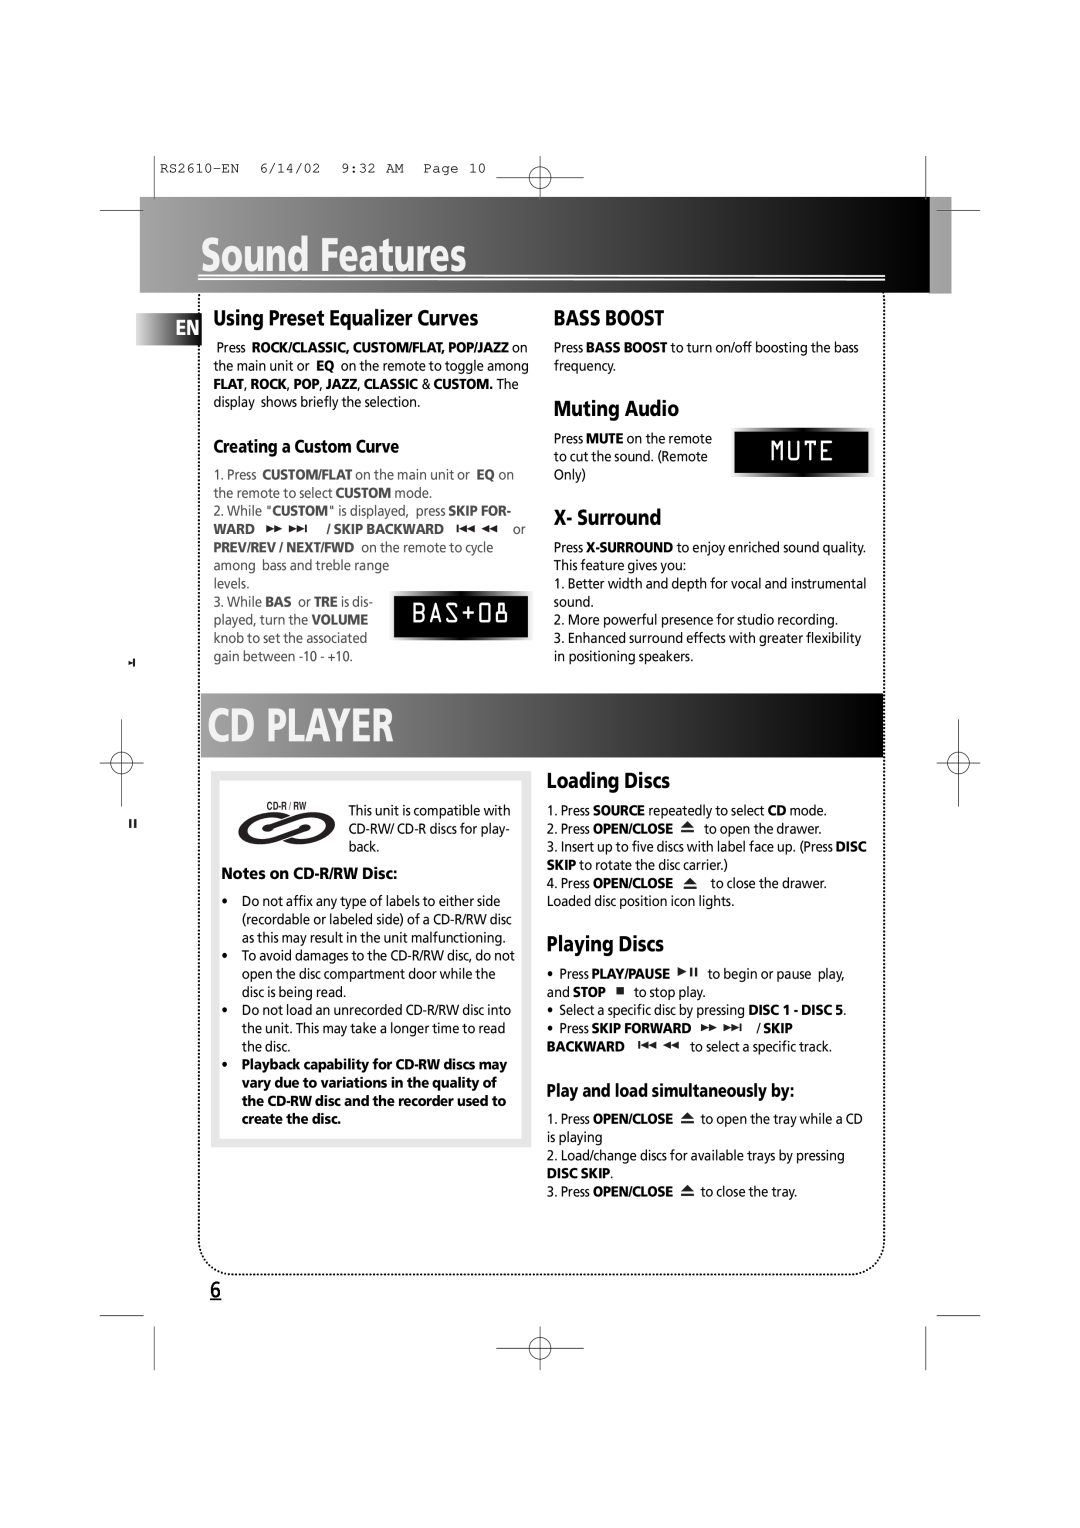 RCA fm radio tuner manual Sound Features, Cd Player, BAS+08, EN Using Preset Equalizer Curves, Bass Boost, Muting Audio 